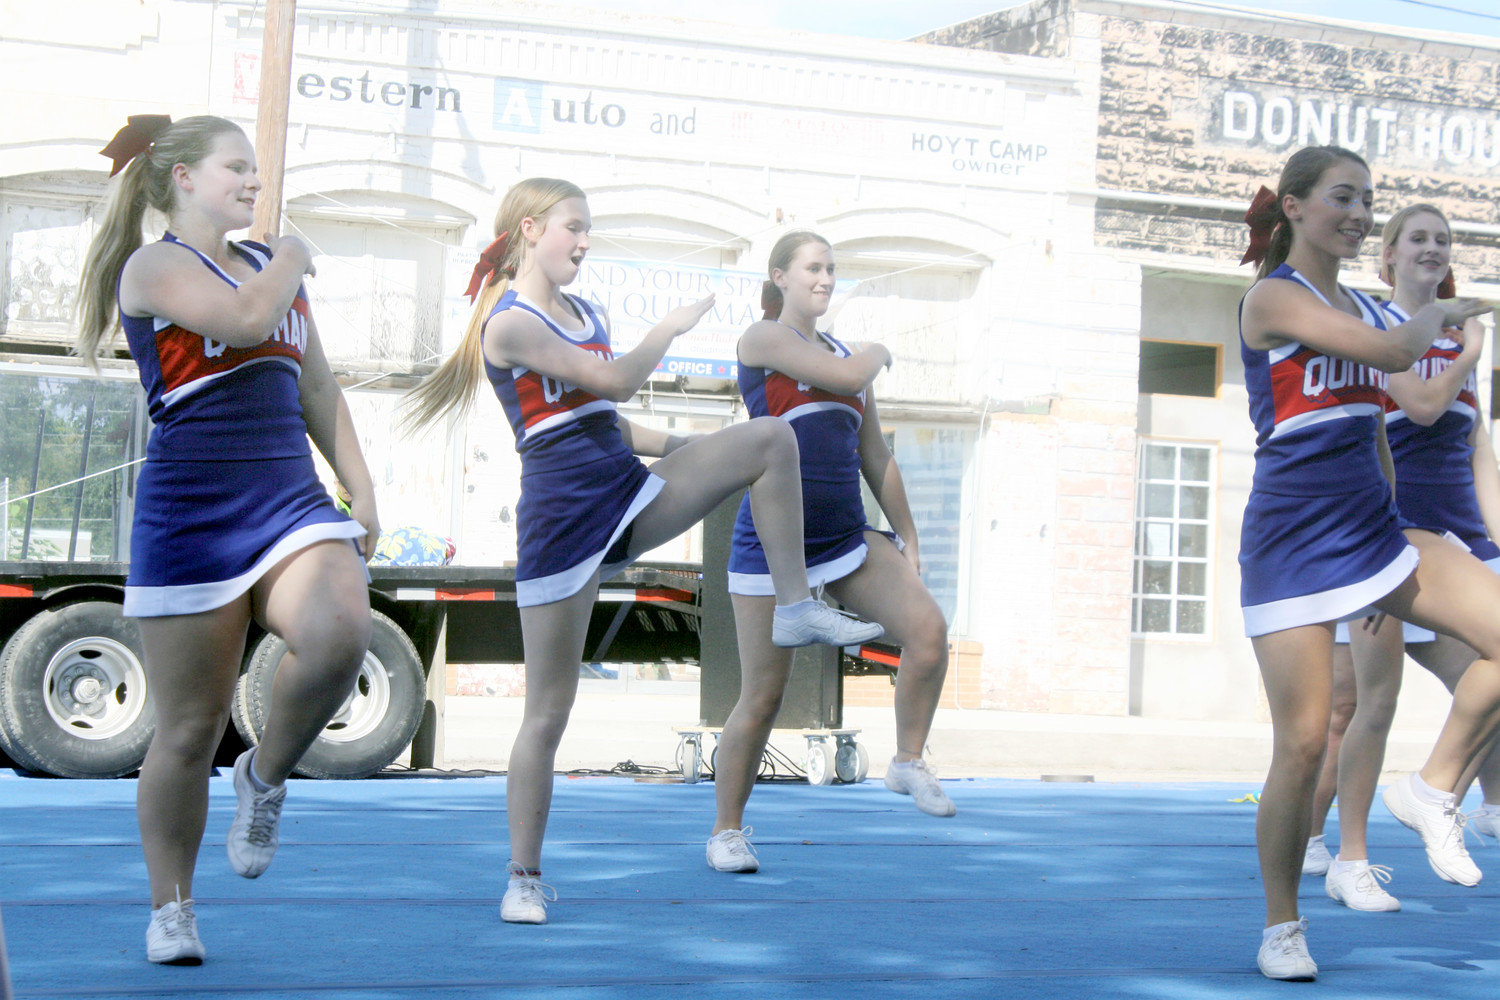 Quitman cheerleaders were high stepping at Friday’s homecoming pep rally in downtown Quitman.